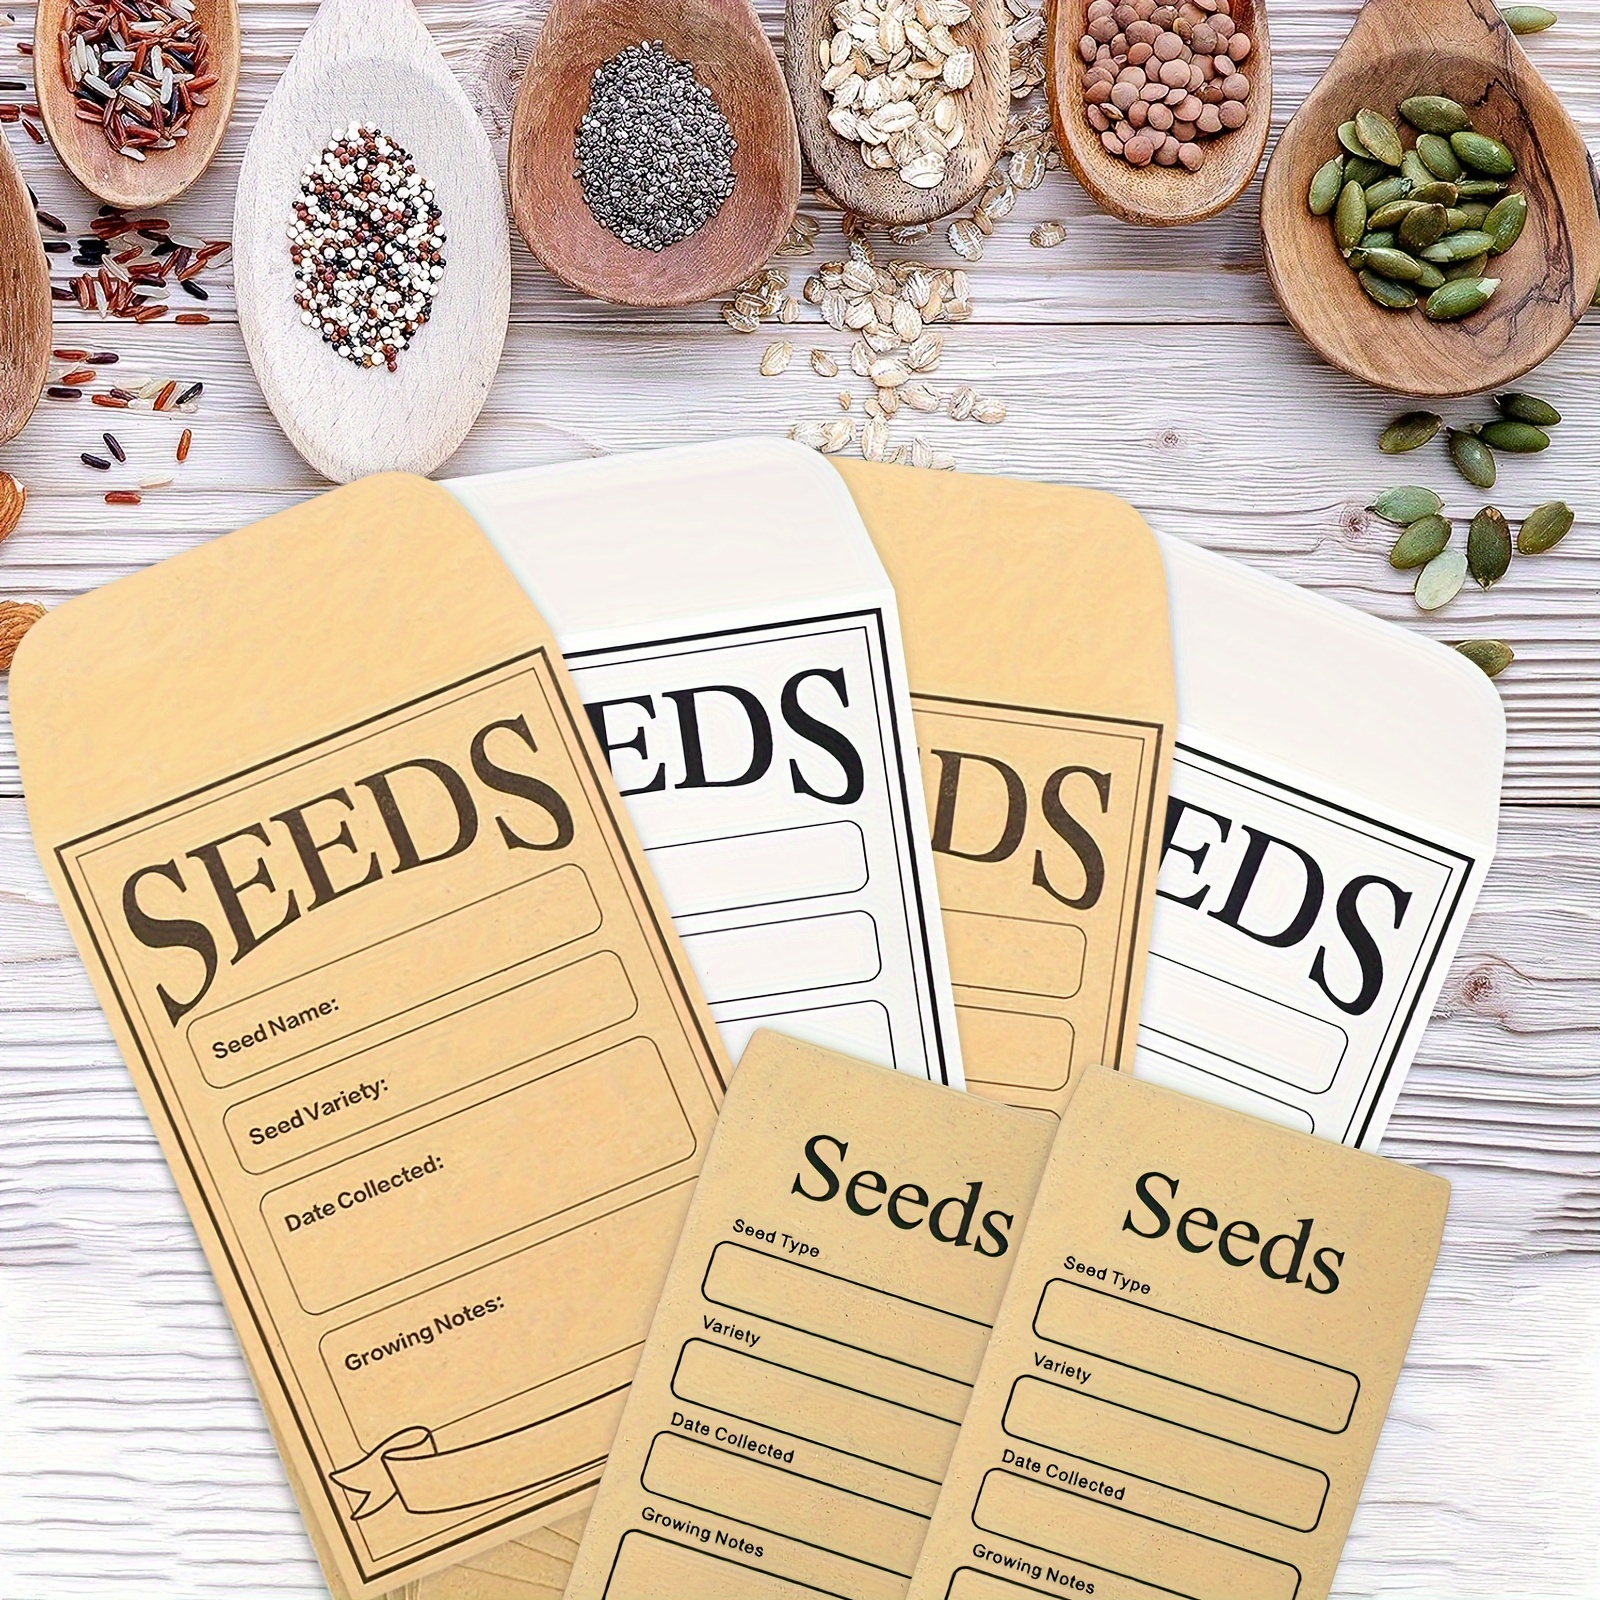 My seed packet organizer is 40 PERCENT OFF right now so I 🔗ed it